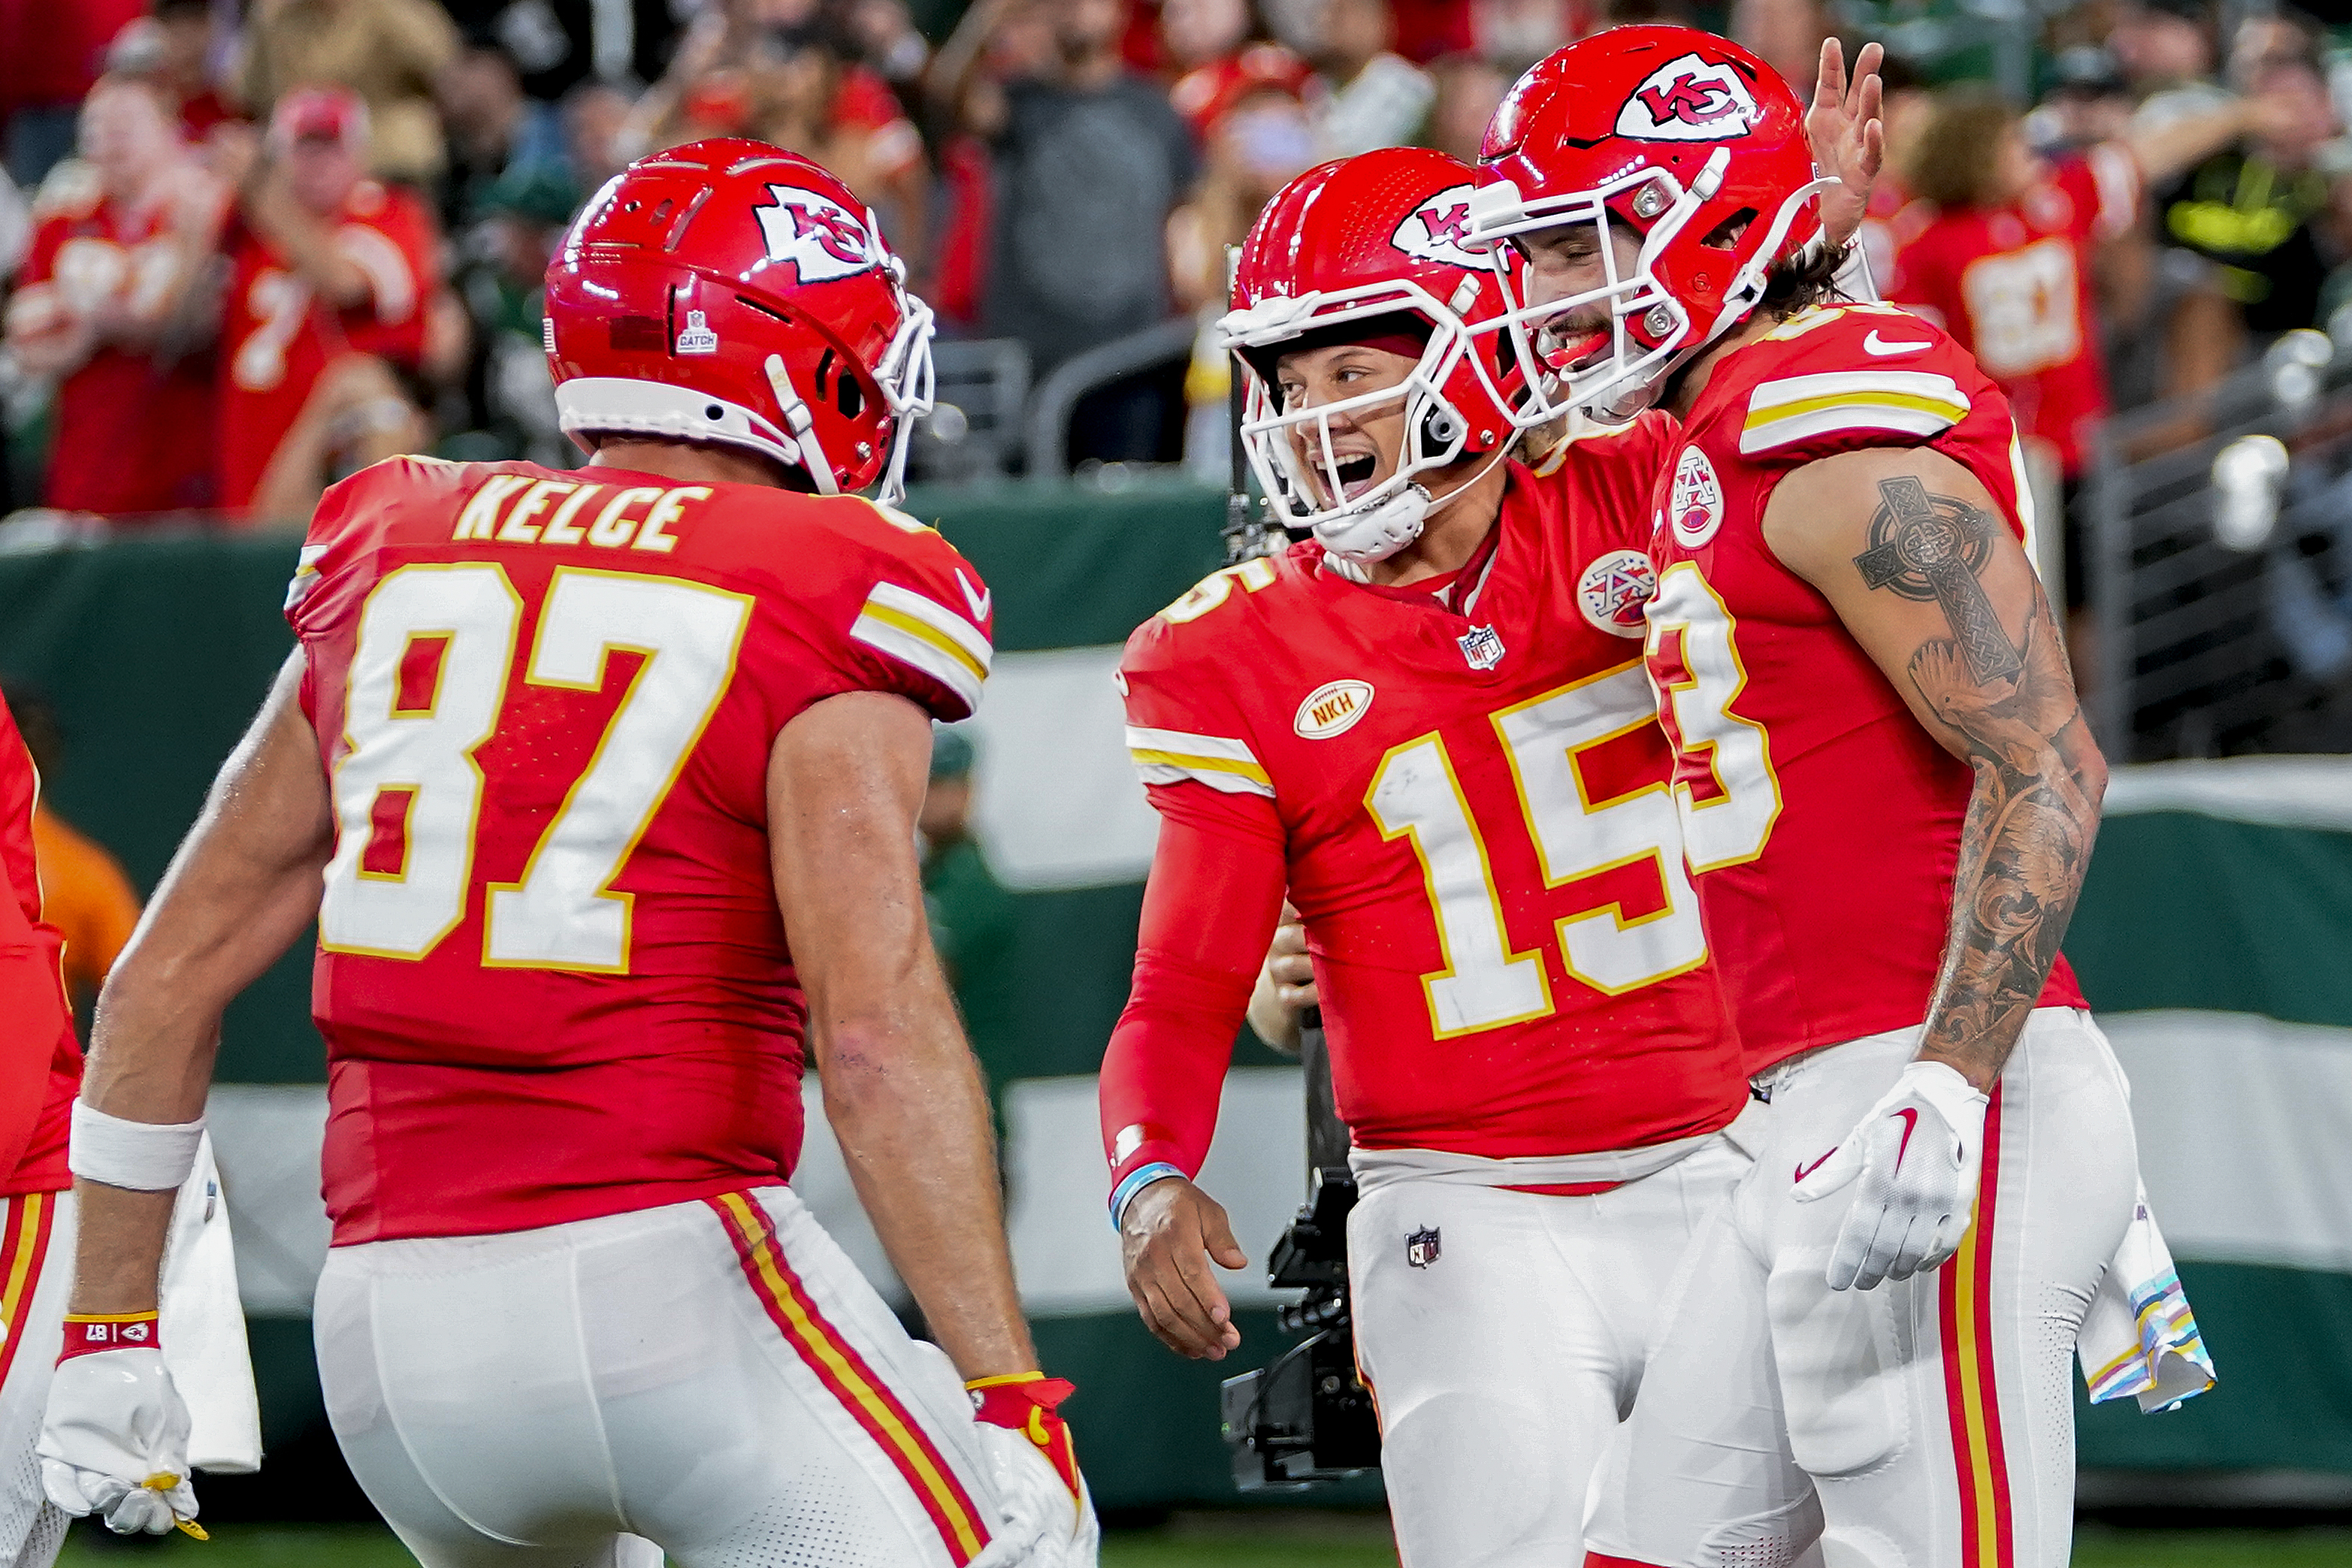 Kansas City Chiefs duo Patrick Mahomes (number 15) and Travis Kelce (no.87) are included in the group